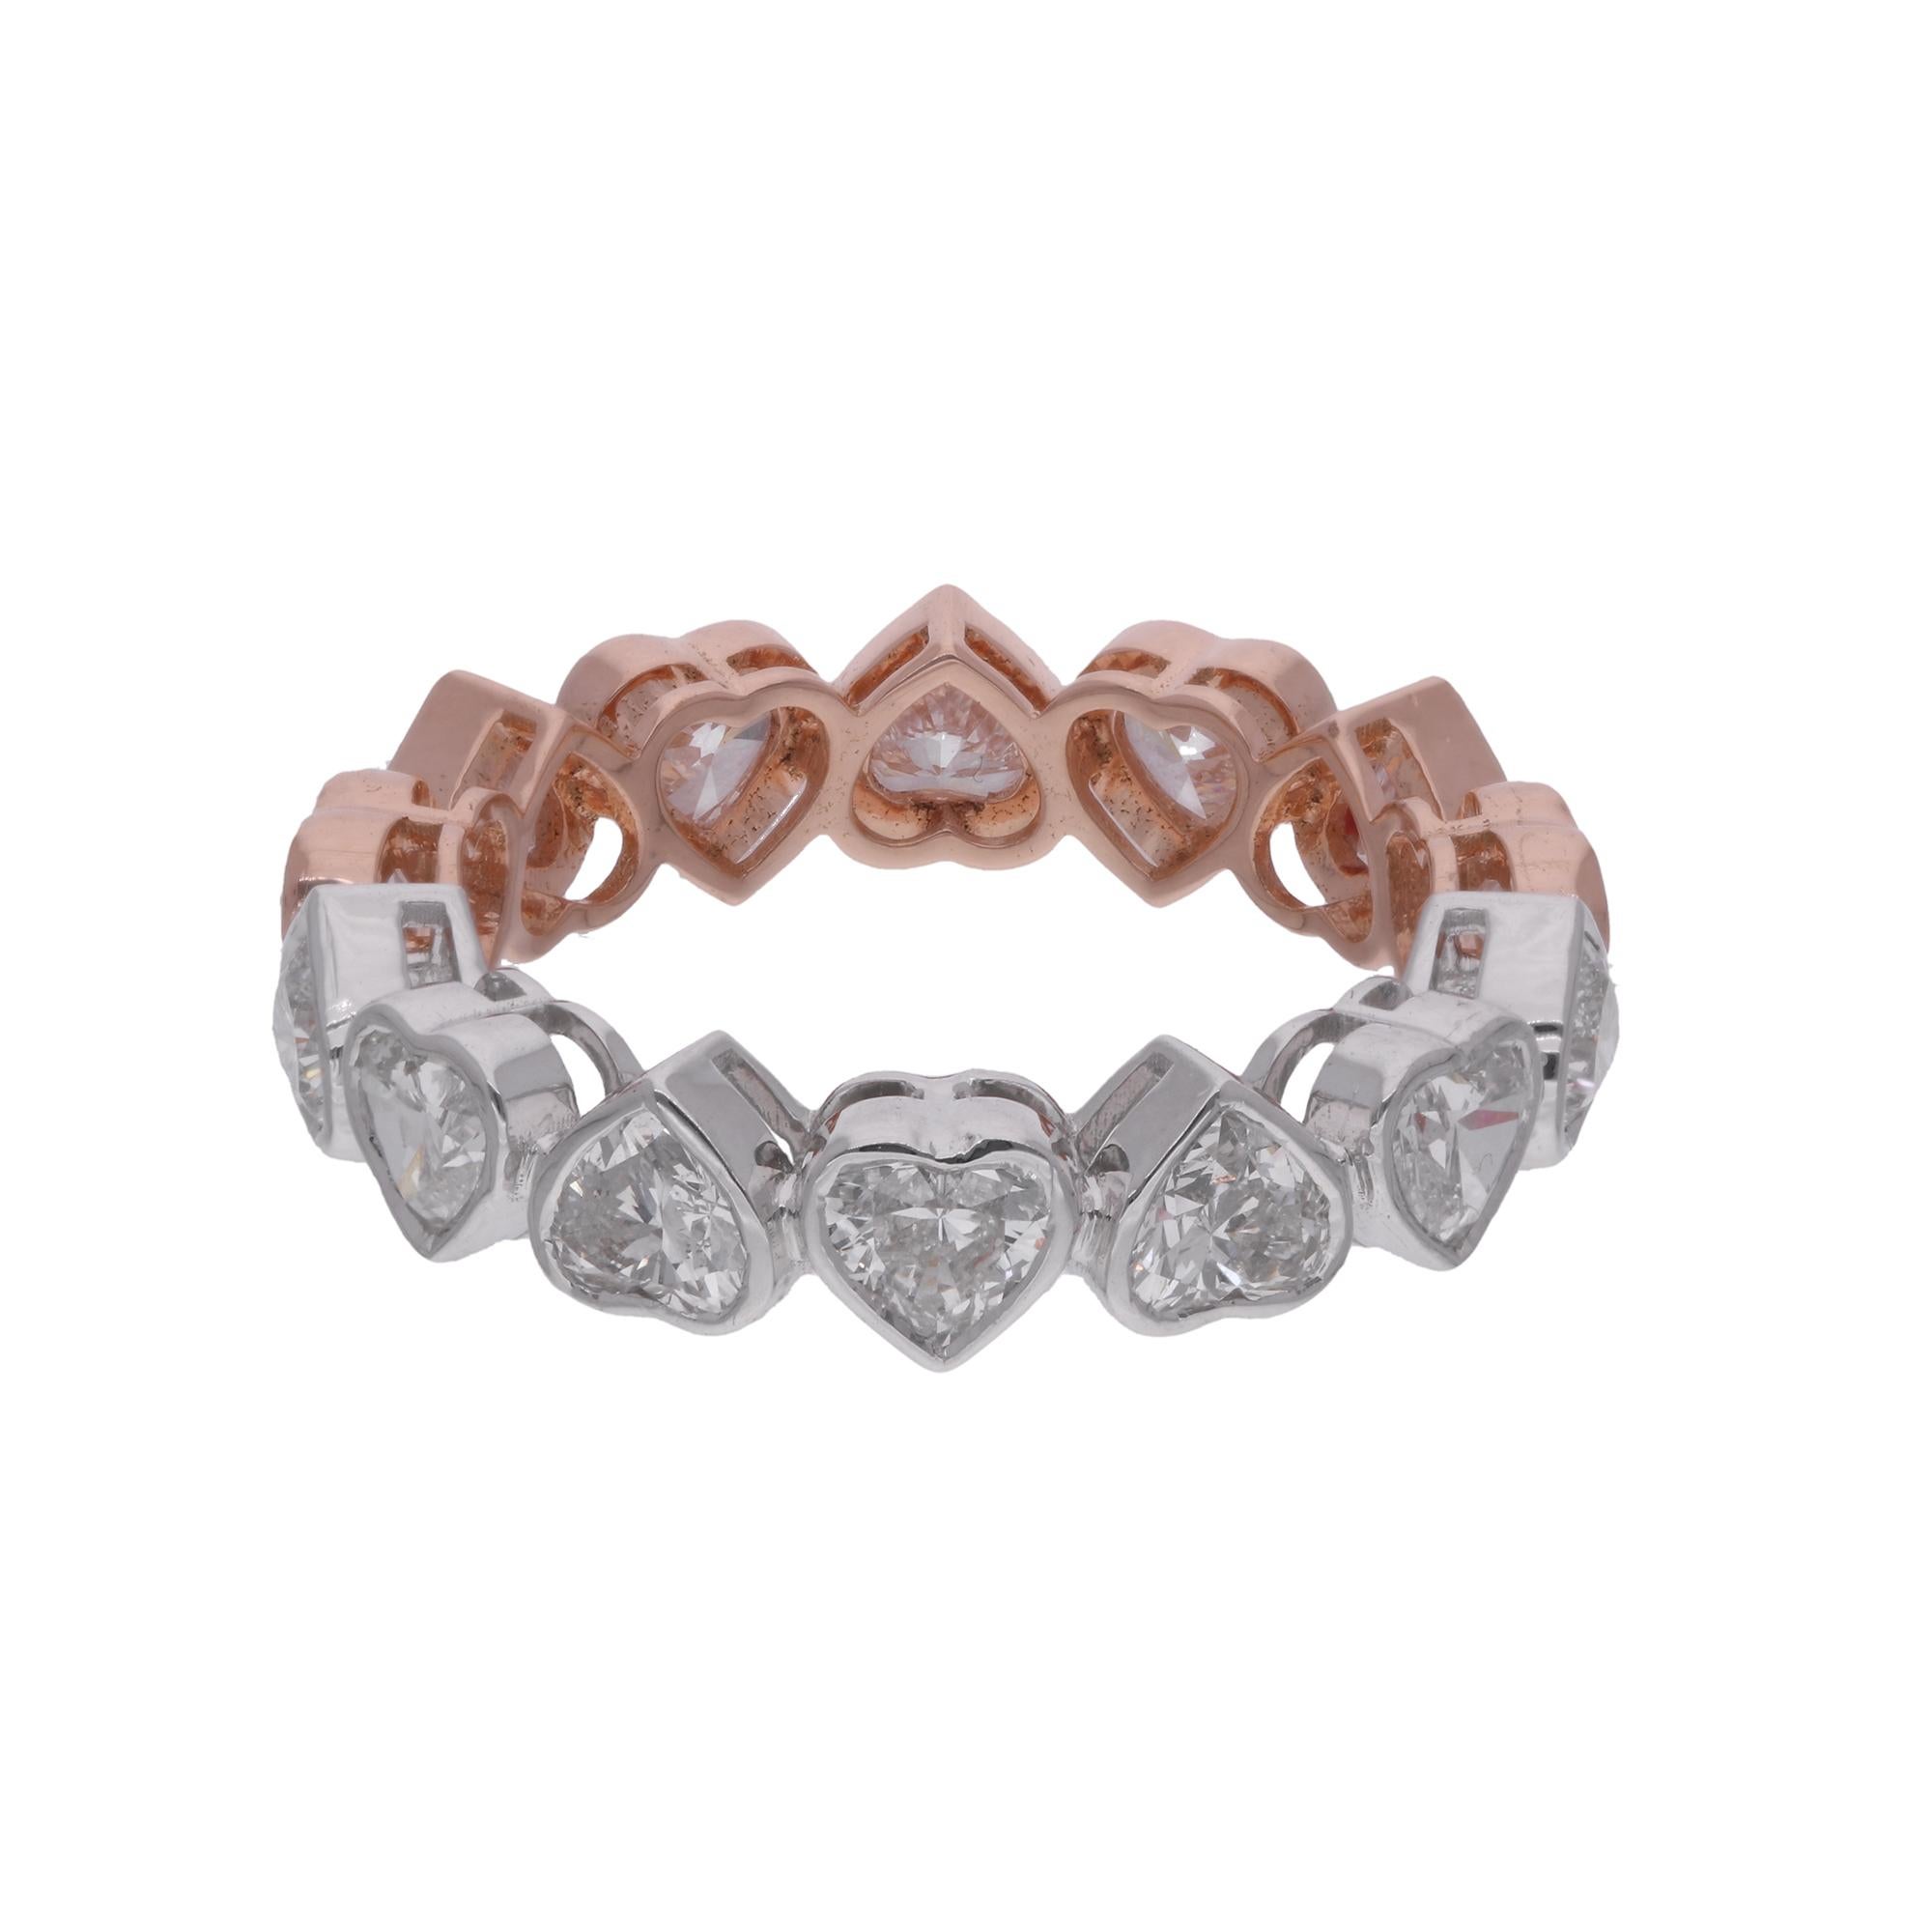 Crafted with precision and care, the heart-shaped diamond is embraced by a band of 18 karat rose gold, adding warmth and femininity to the design. The band is delicately accented with shimmering white gold, creating a striking contrast that enhances